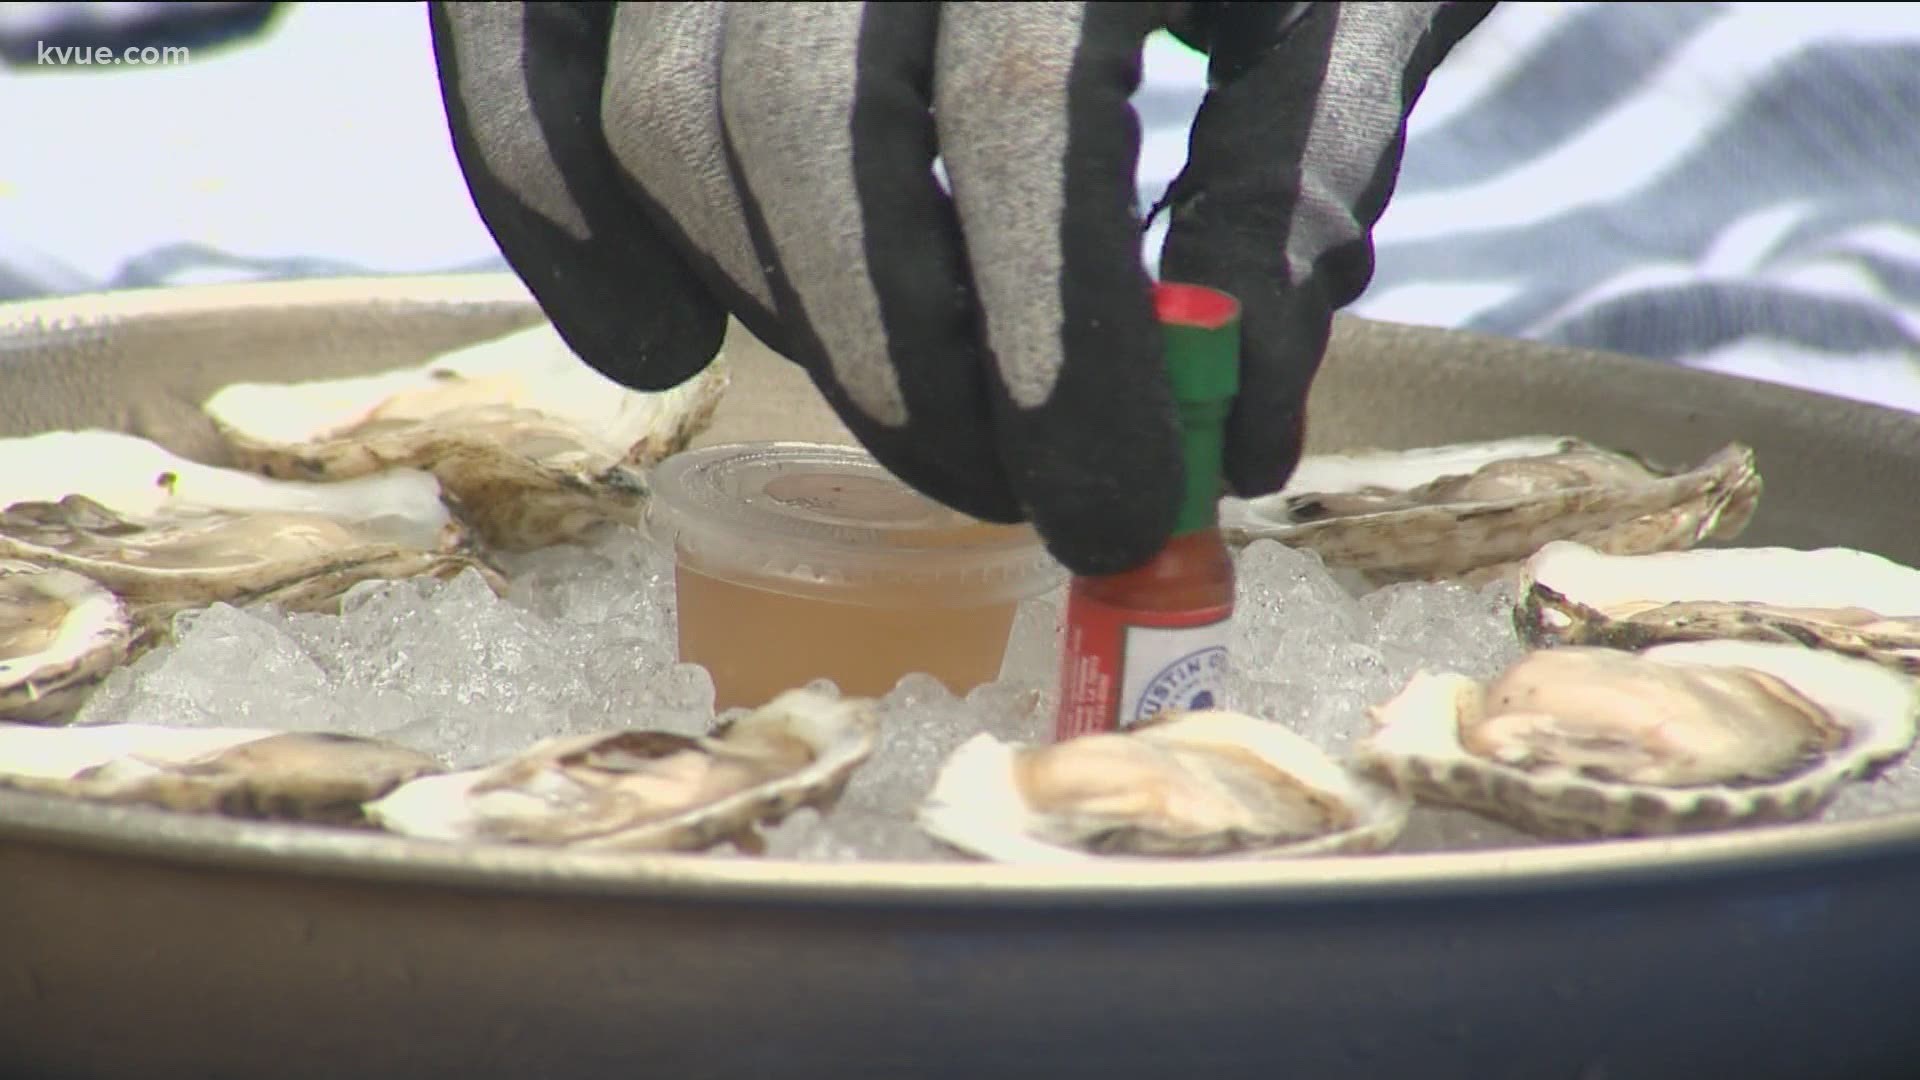 Fresh oysters delivered to your home? Shucks, that sounds great! For this Take This Job, Yvonne and Rob tried shucking oysters with Austin Oyster Company.